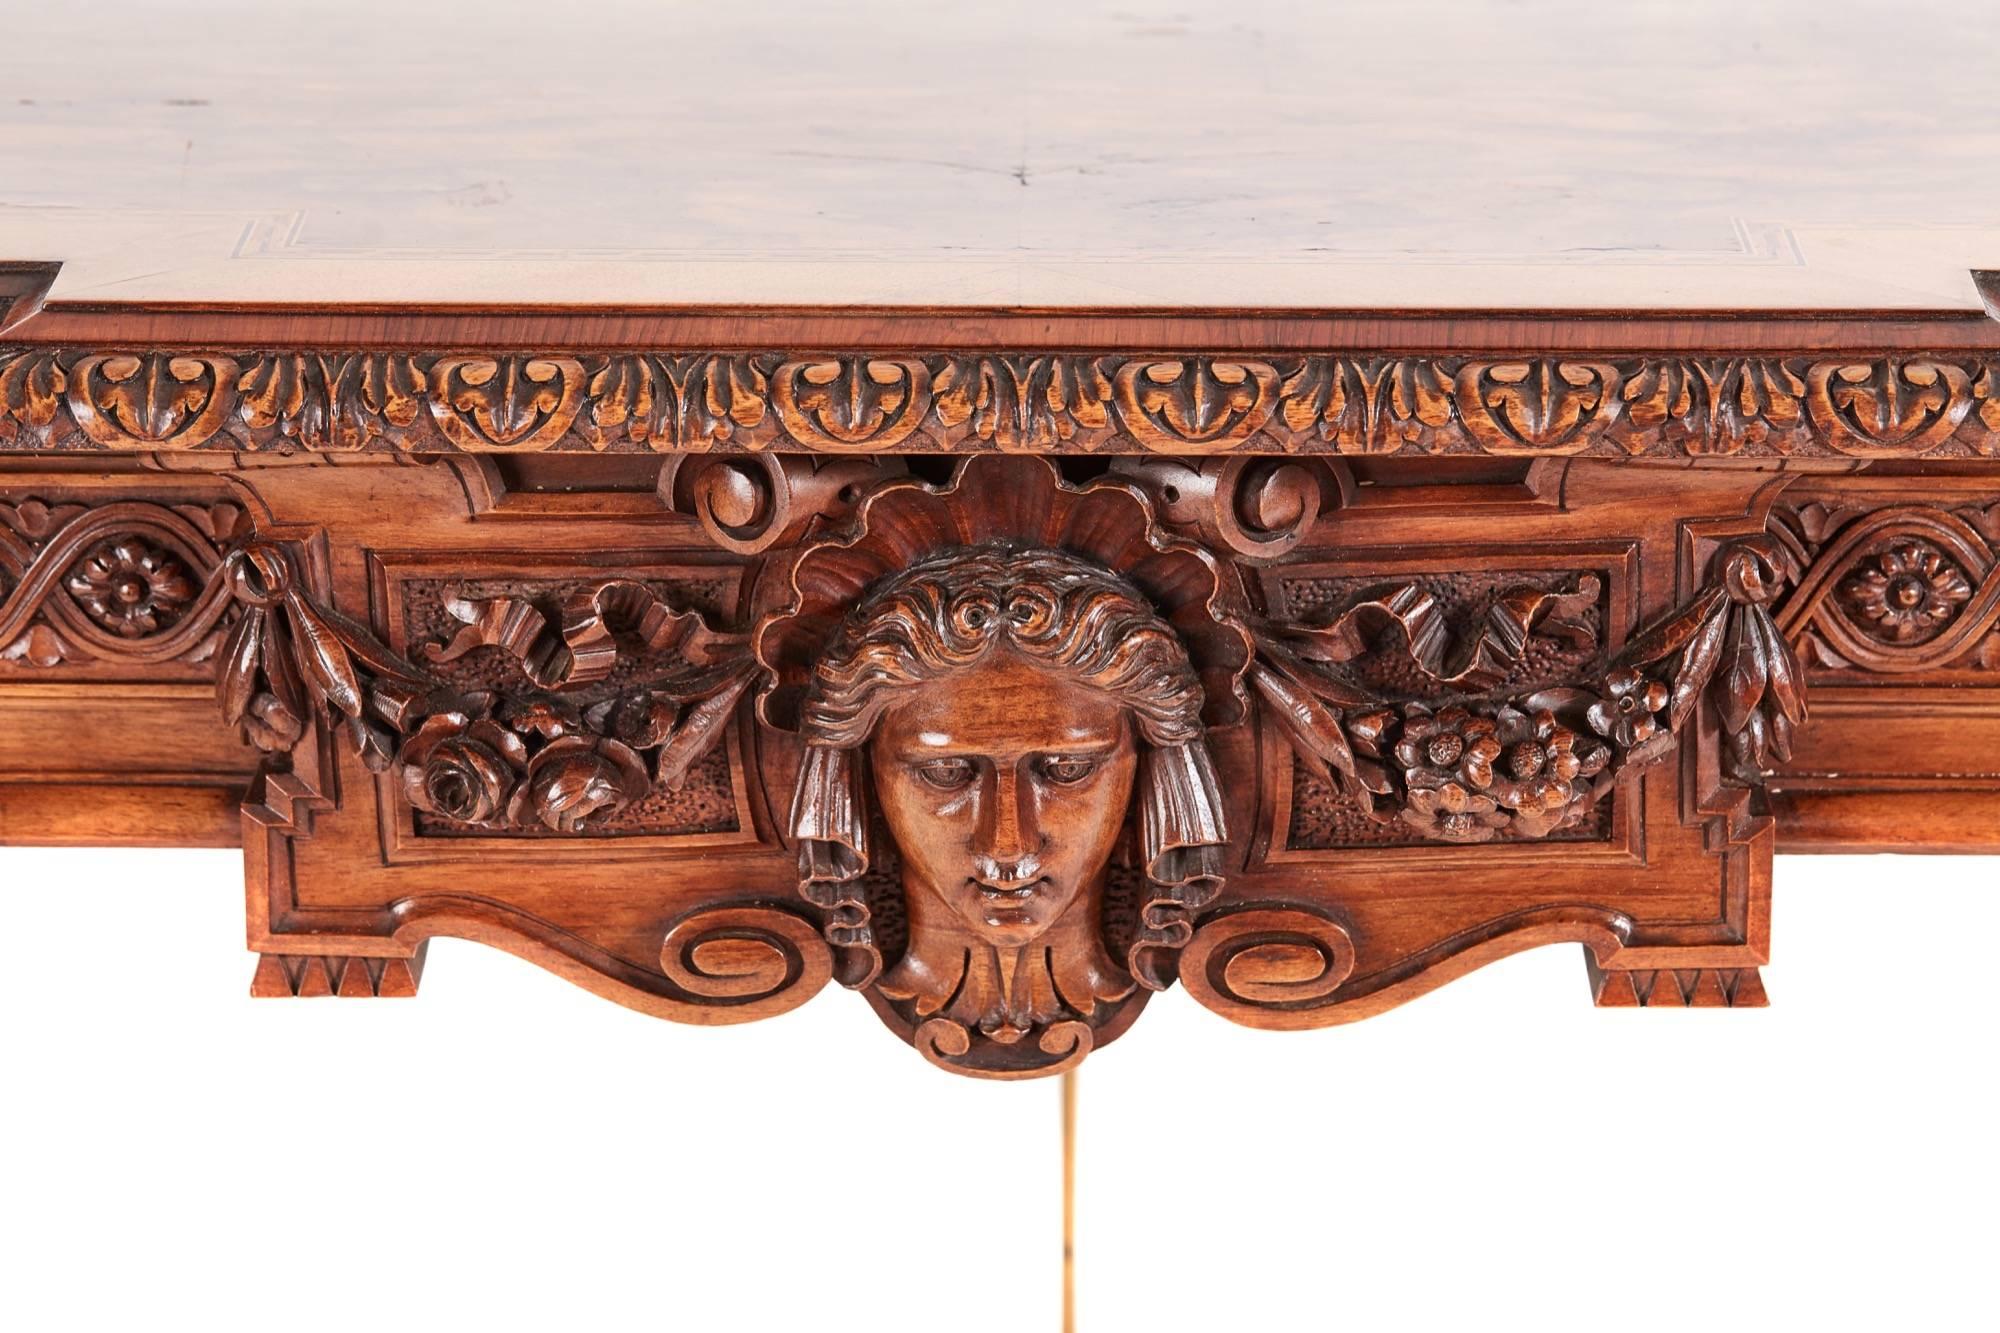 A fine and rare pair of French carved walnut console tables, with quality burr walnut tops, inlaid chequered banding, crossbanded in walnut with a fine carved edge, an amazing carved solid walnut frieze to the centre of the frieze is a beautiful